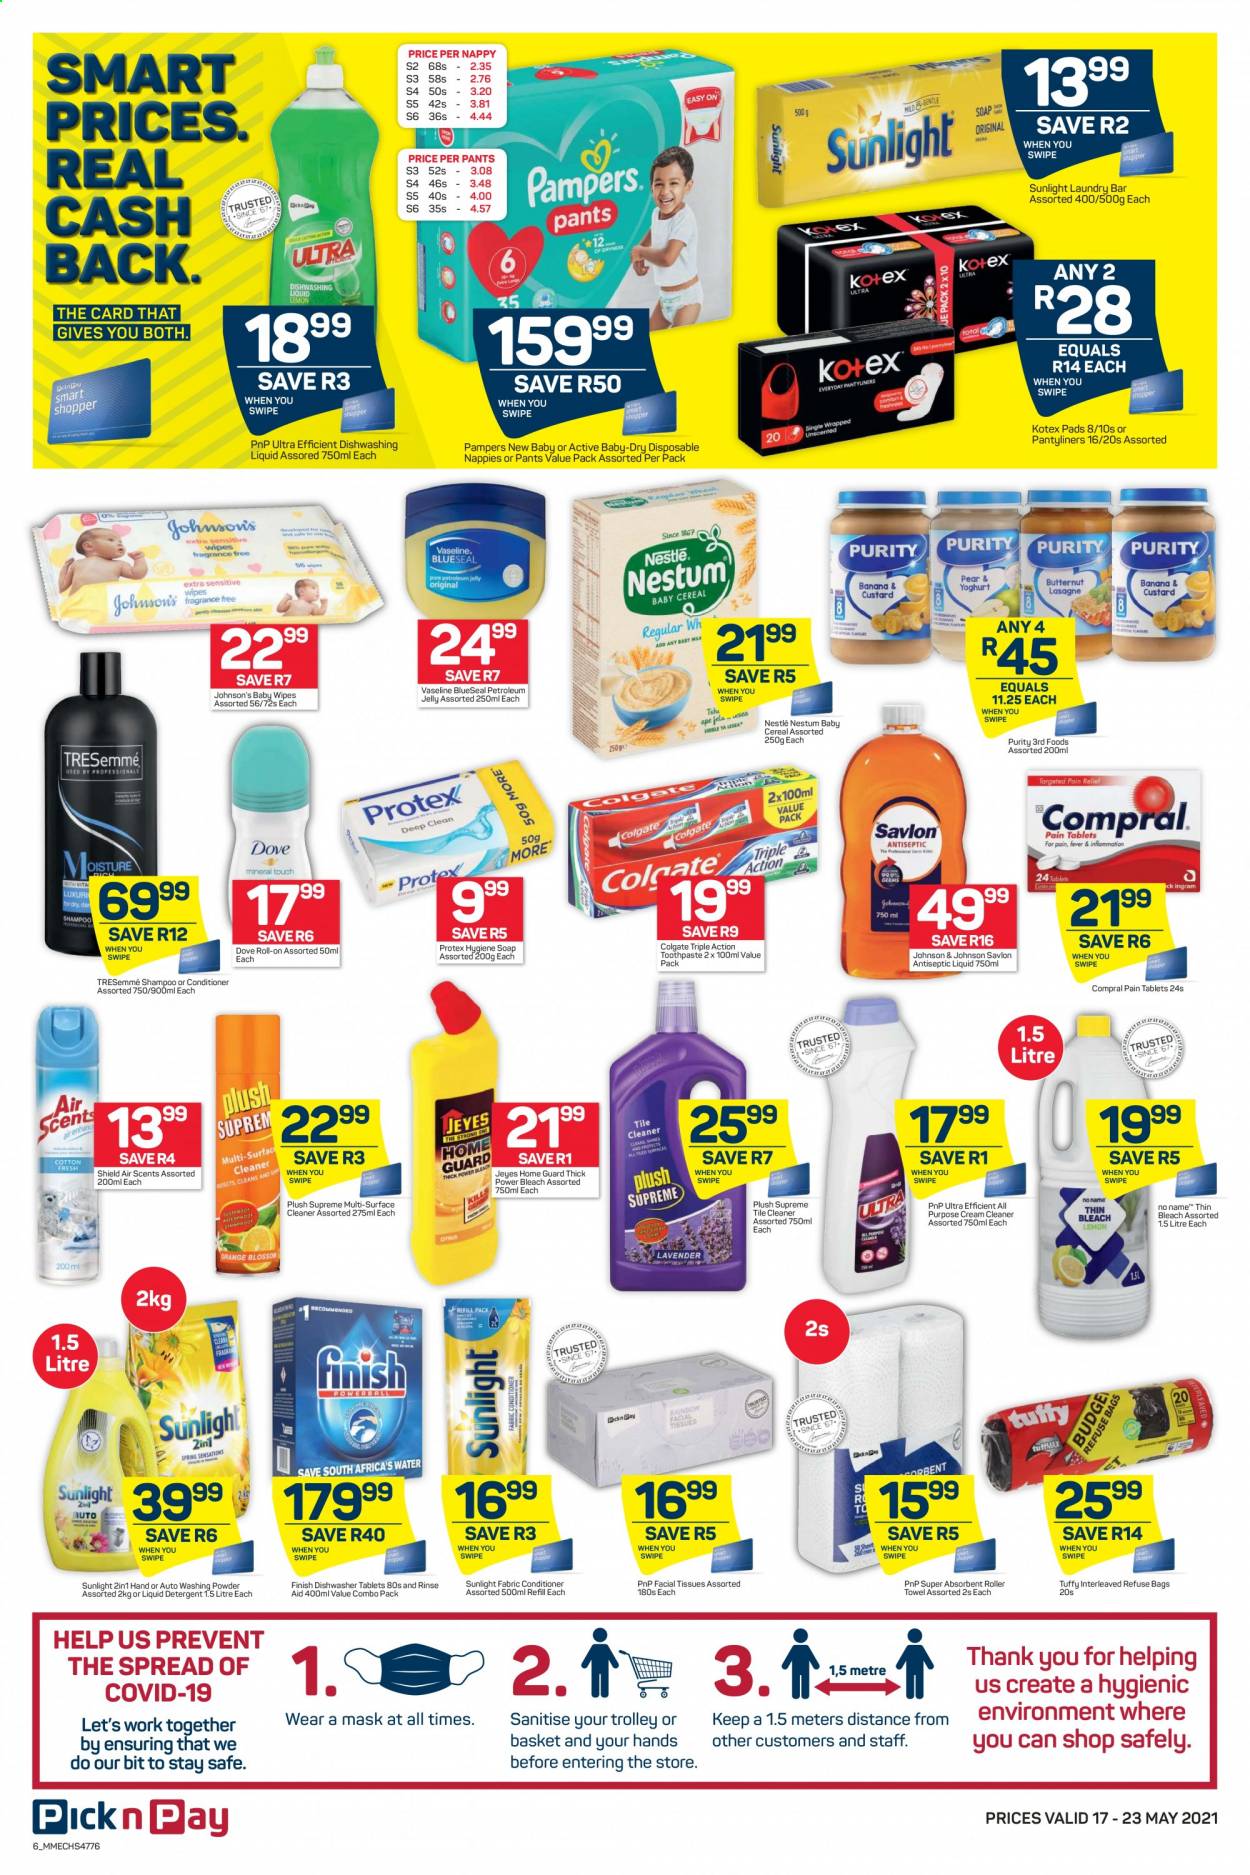 Pick n Pay specials - 05.17.2021 - 05.23.2021. 